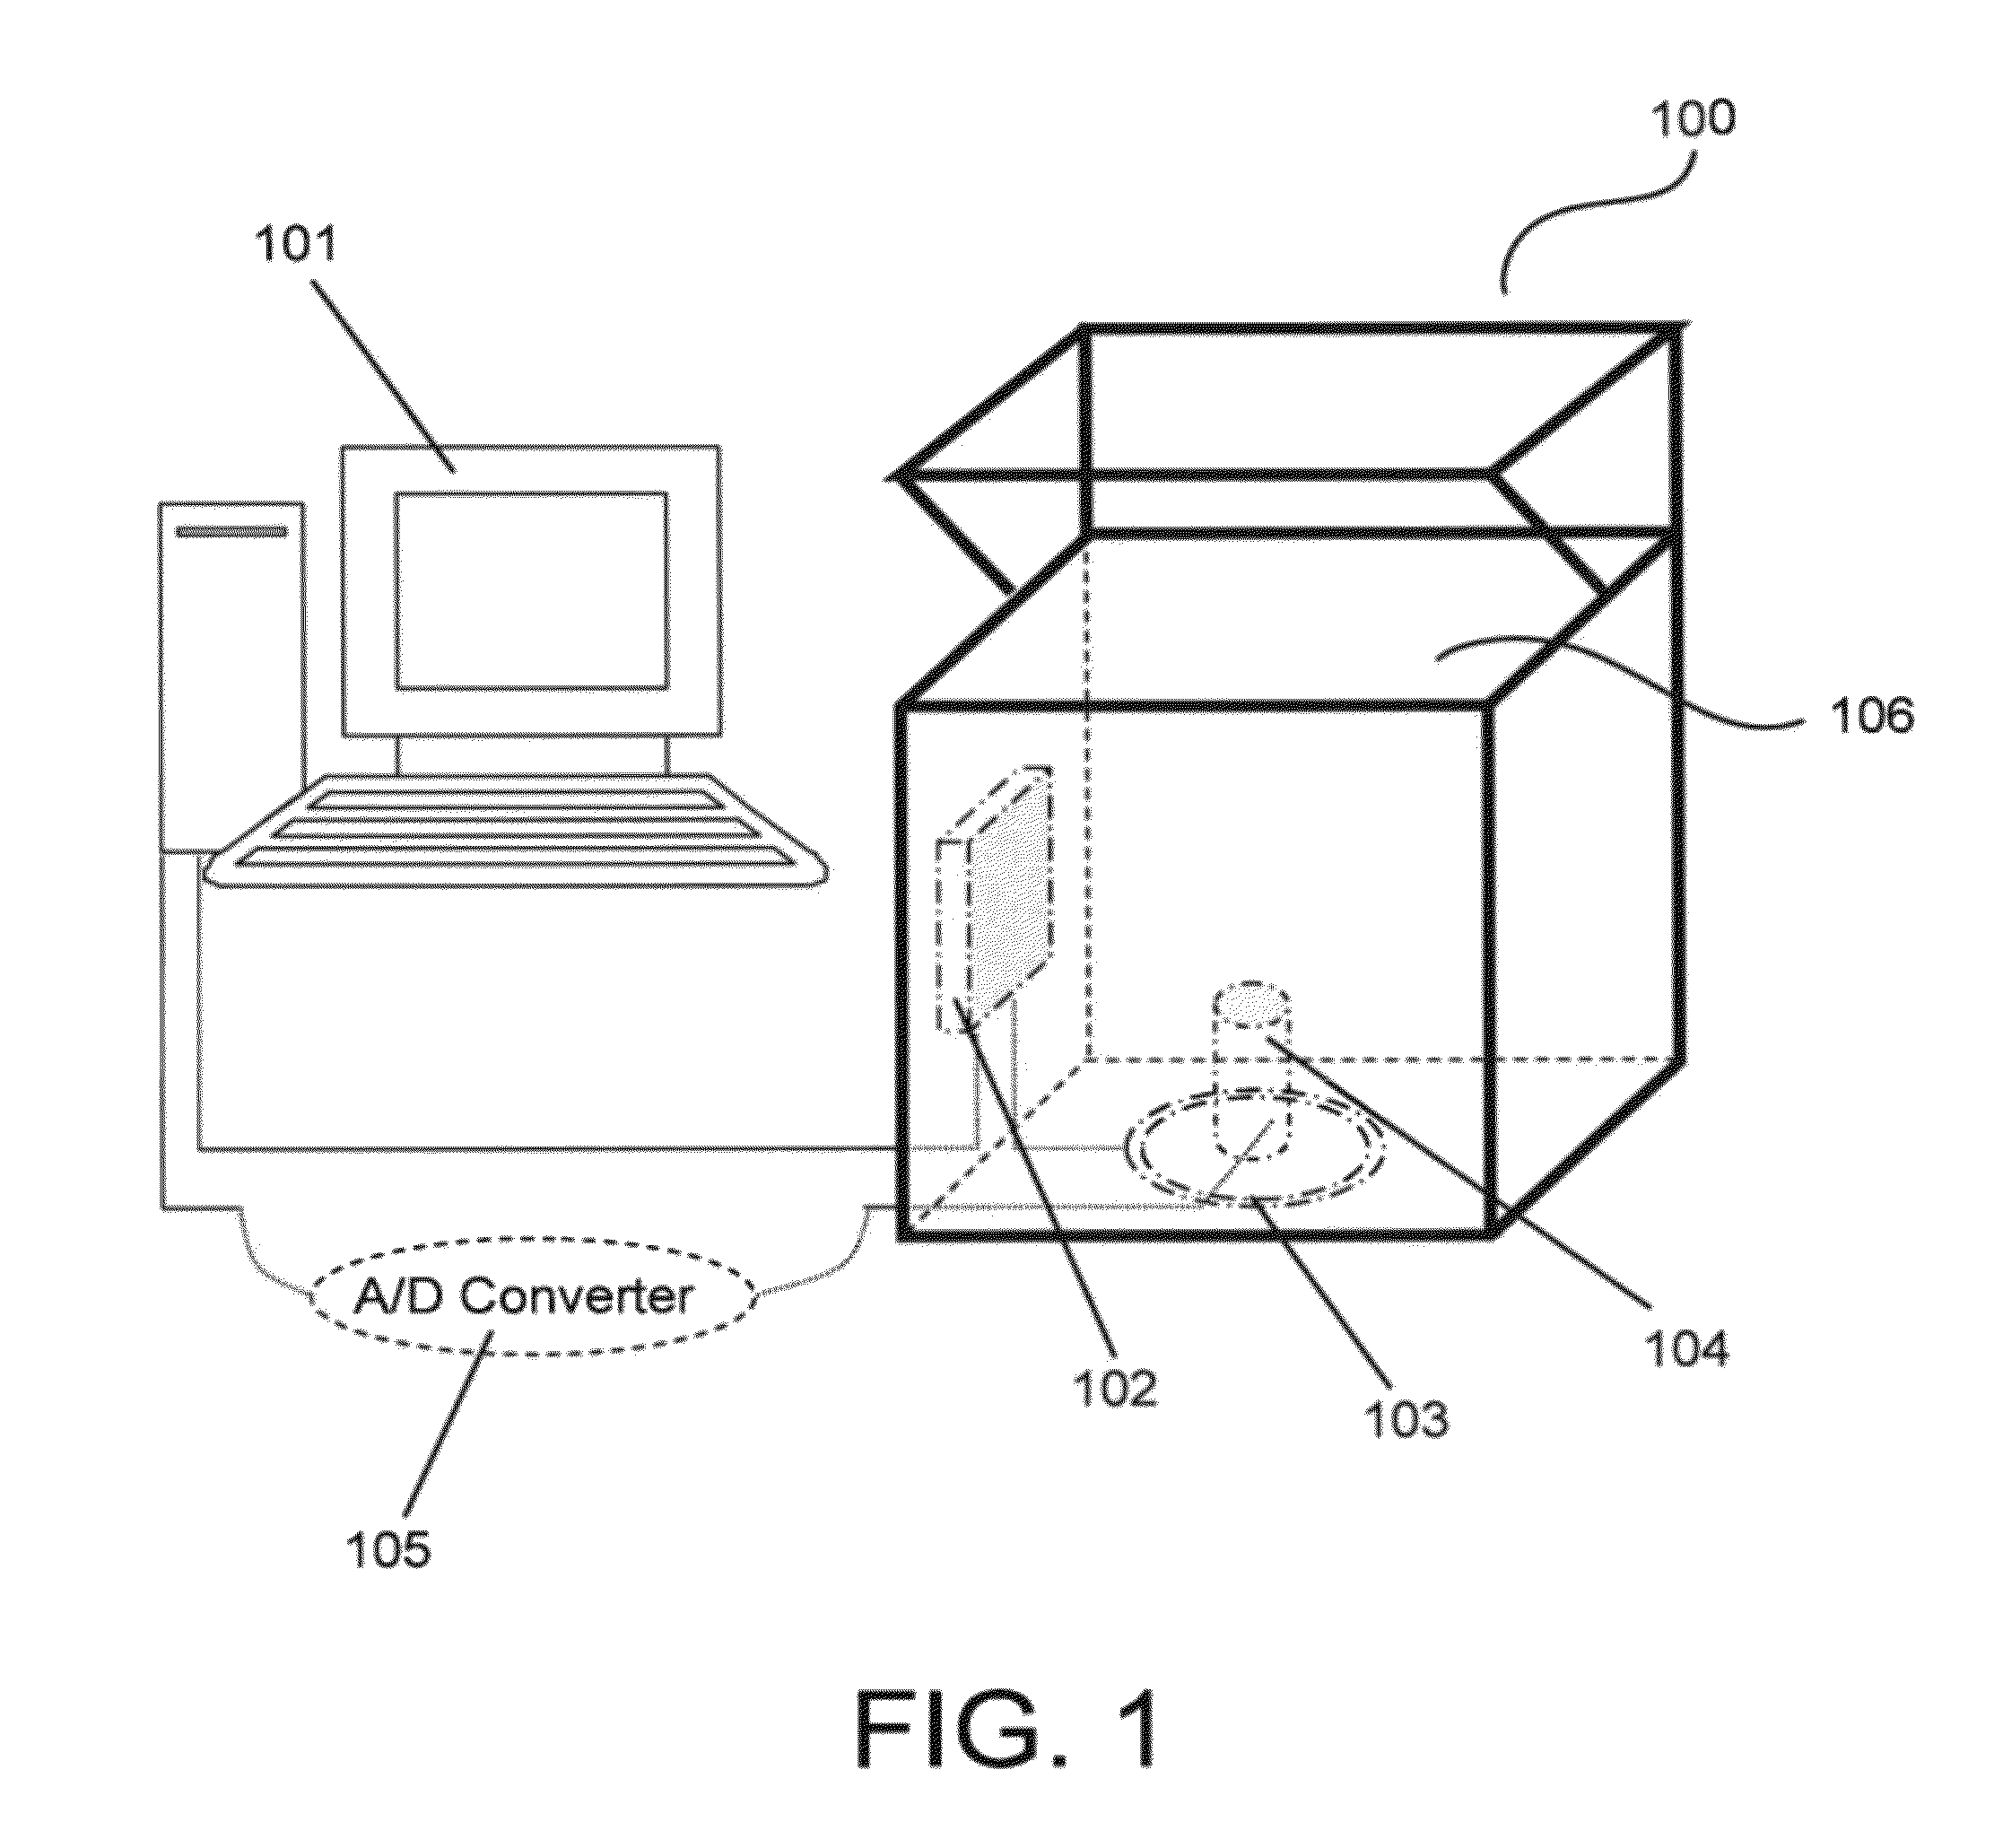 Method and apparatus for personal identification using palmprint and palm vein